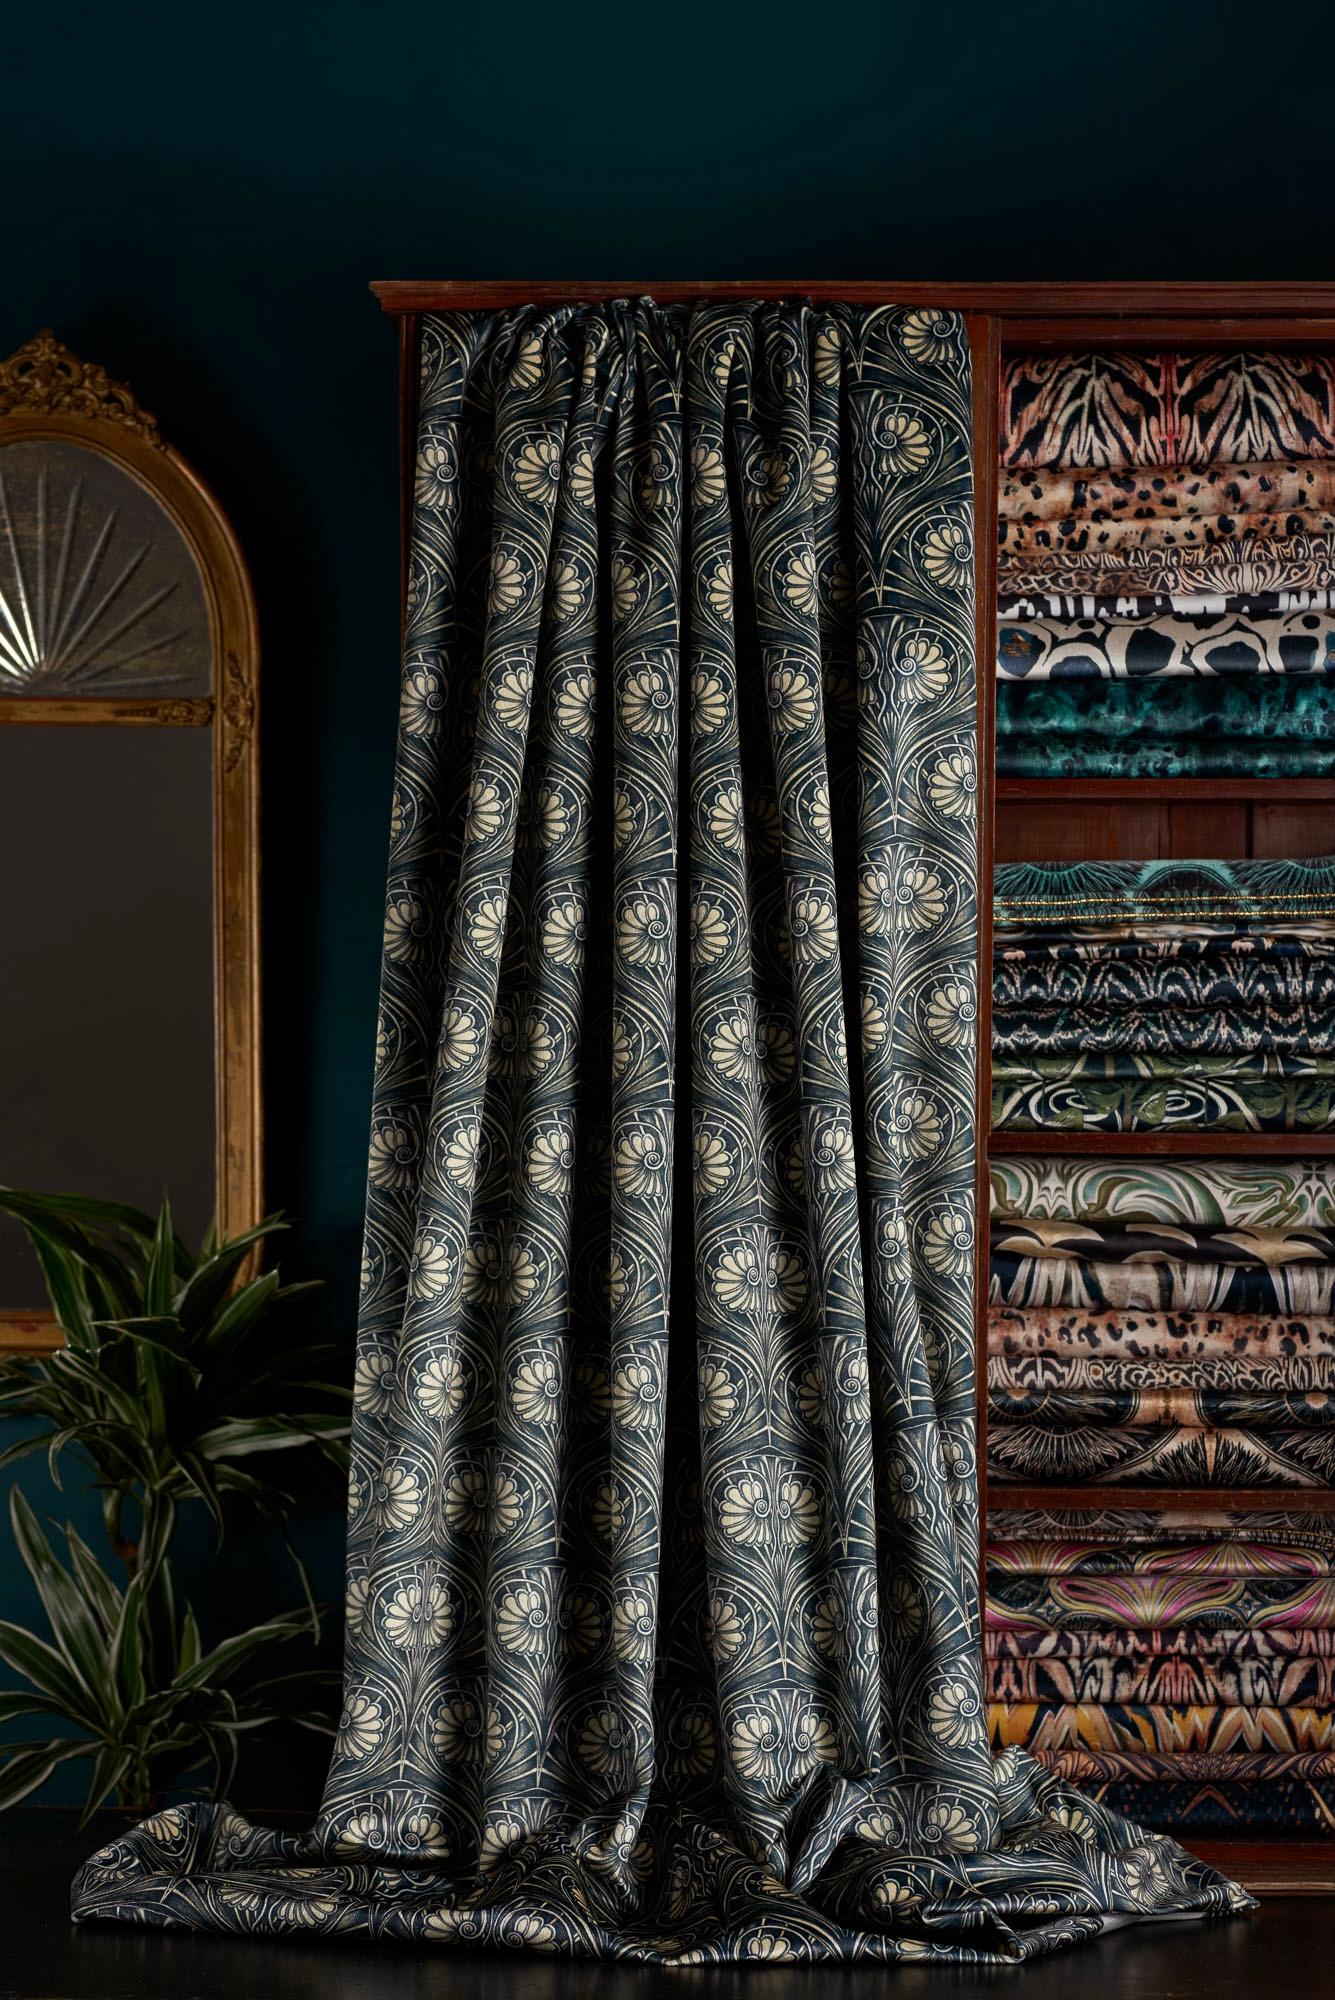 A beautifully soft black and soft gold tone pattern on sensuous velvet. Picking up on Anna’s love of Art Nouveau, this design was hand painted, a feminine floral motif inside a scallop shell.

This velvet is midweight, with a strong straight woven